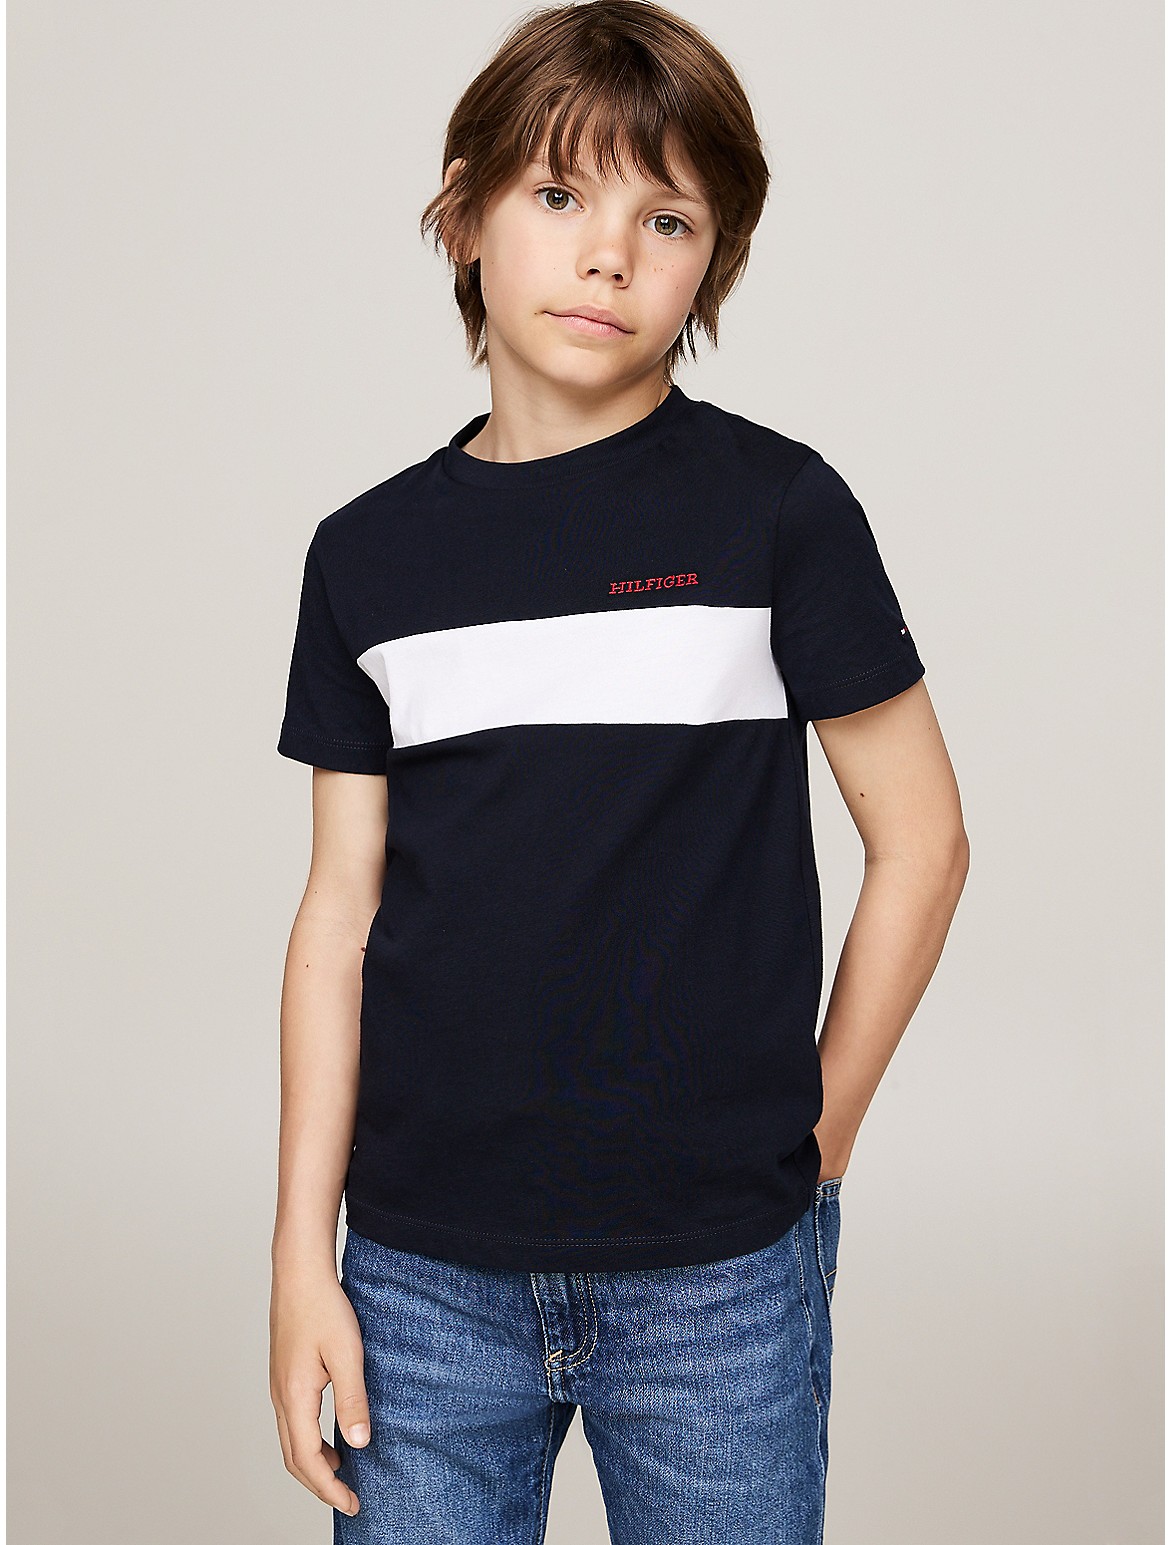 Tommy Hilfiger Boys' Kids' Embroidered Colorblock T-Shirt